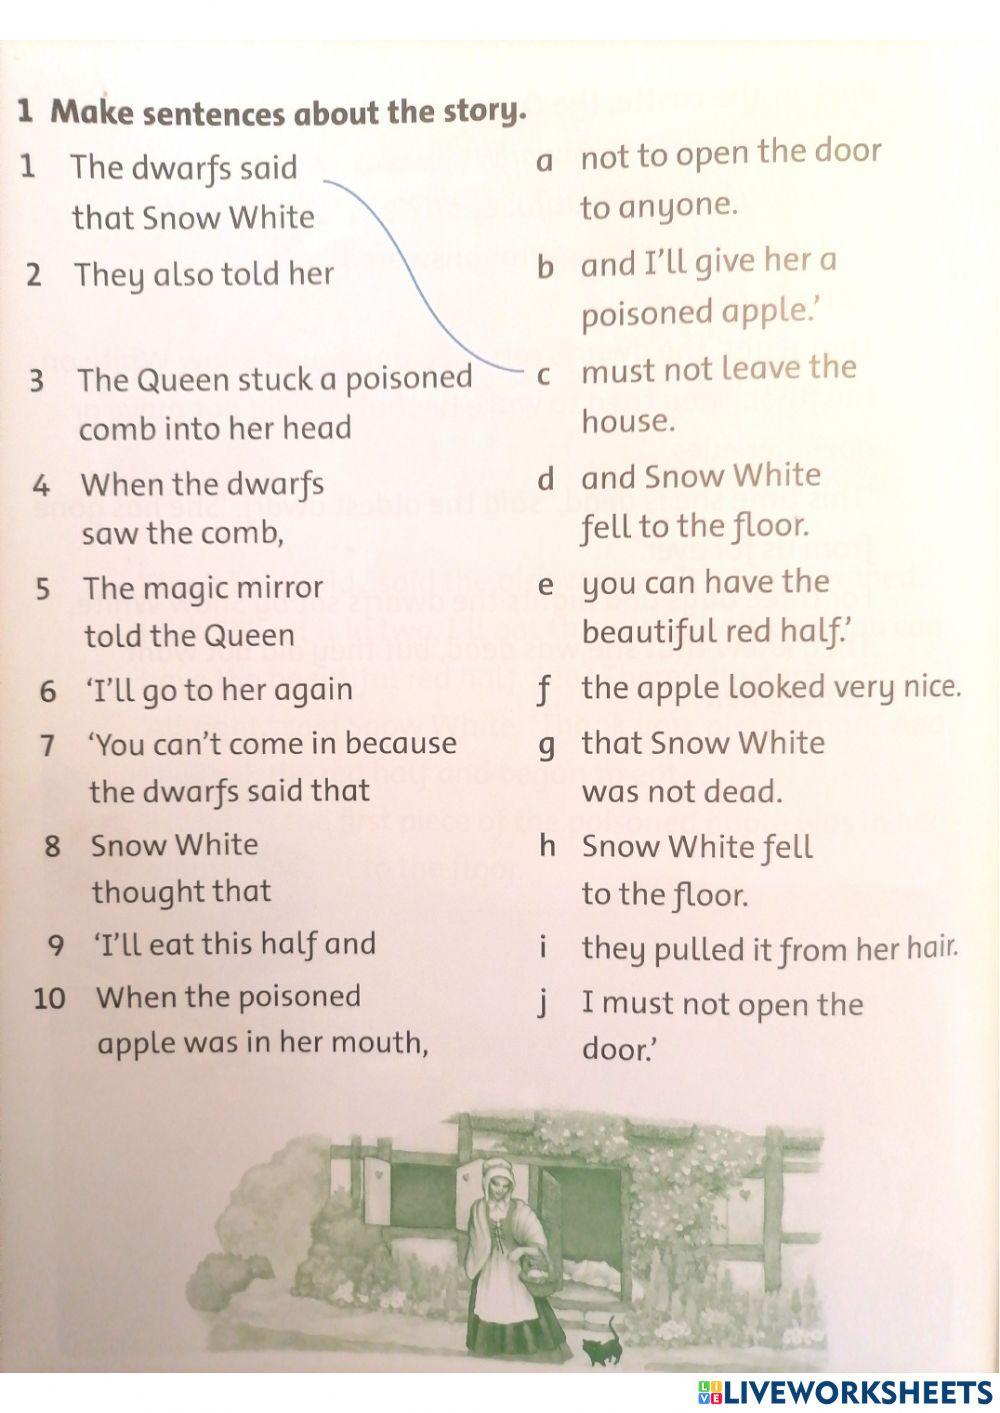 Snow White and the seven dwarfs part 6 Worksheet